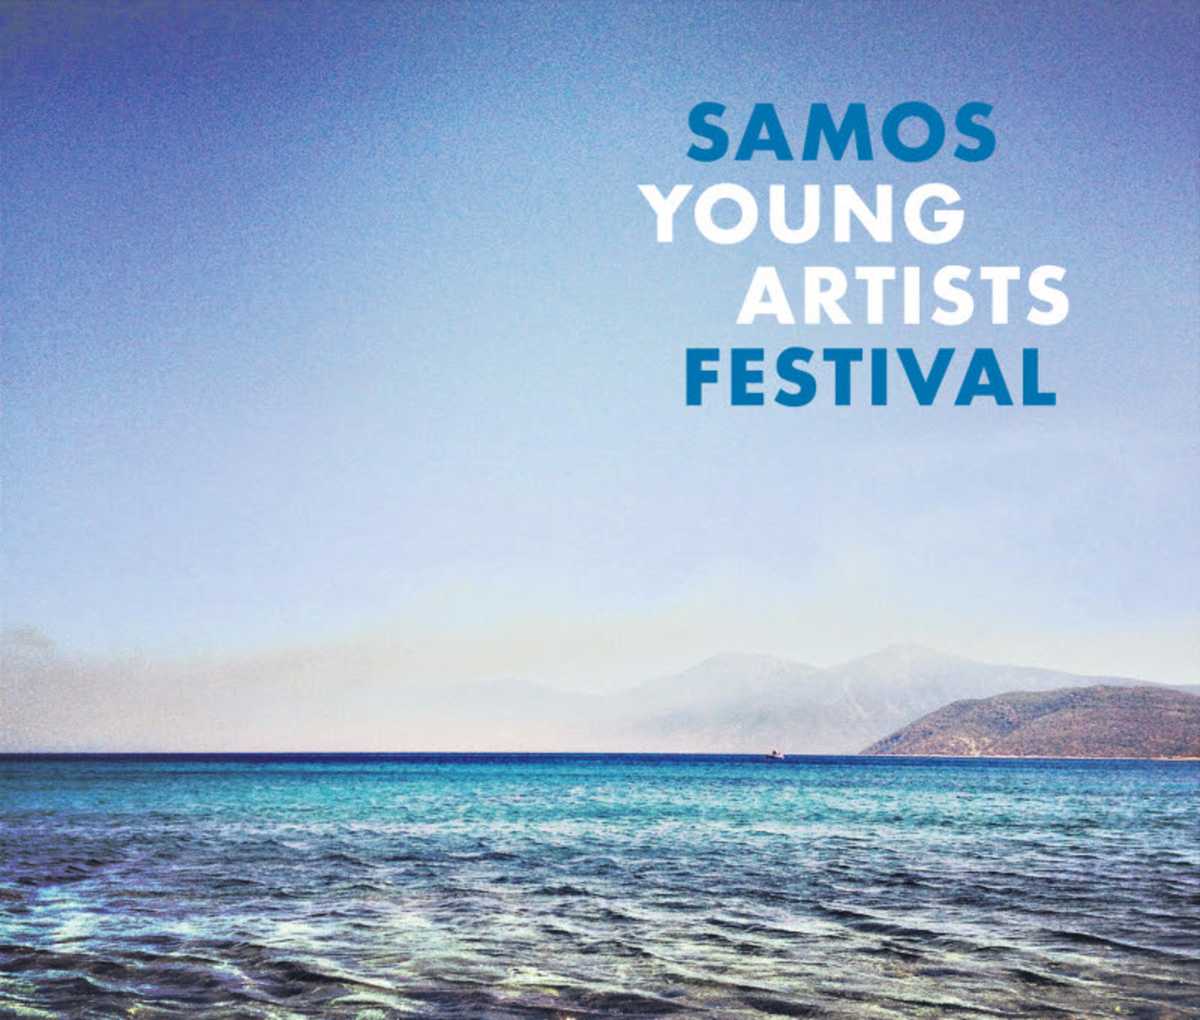 Samos Young Artists Festival 2015